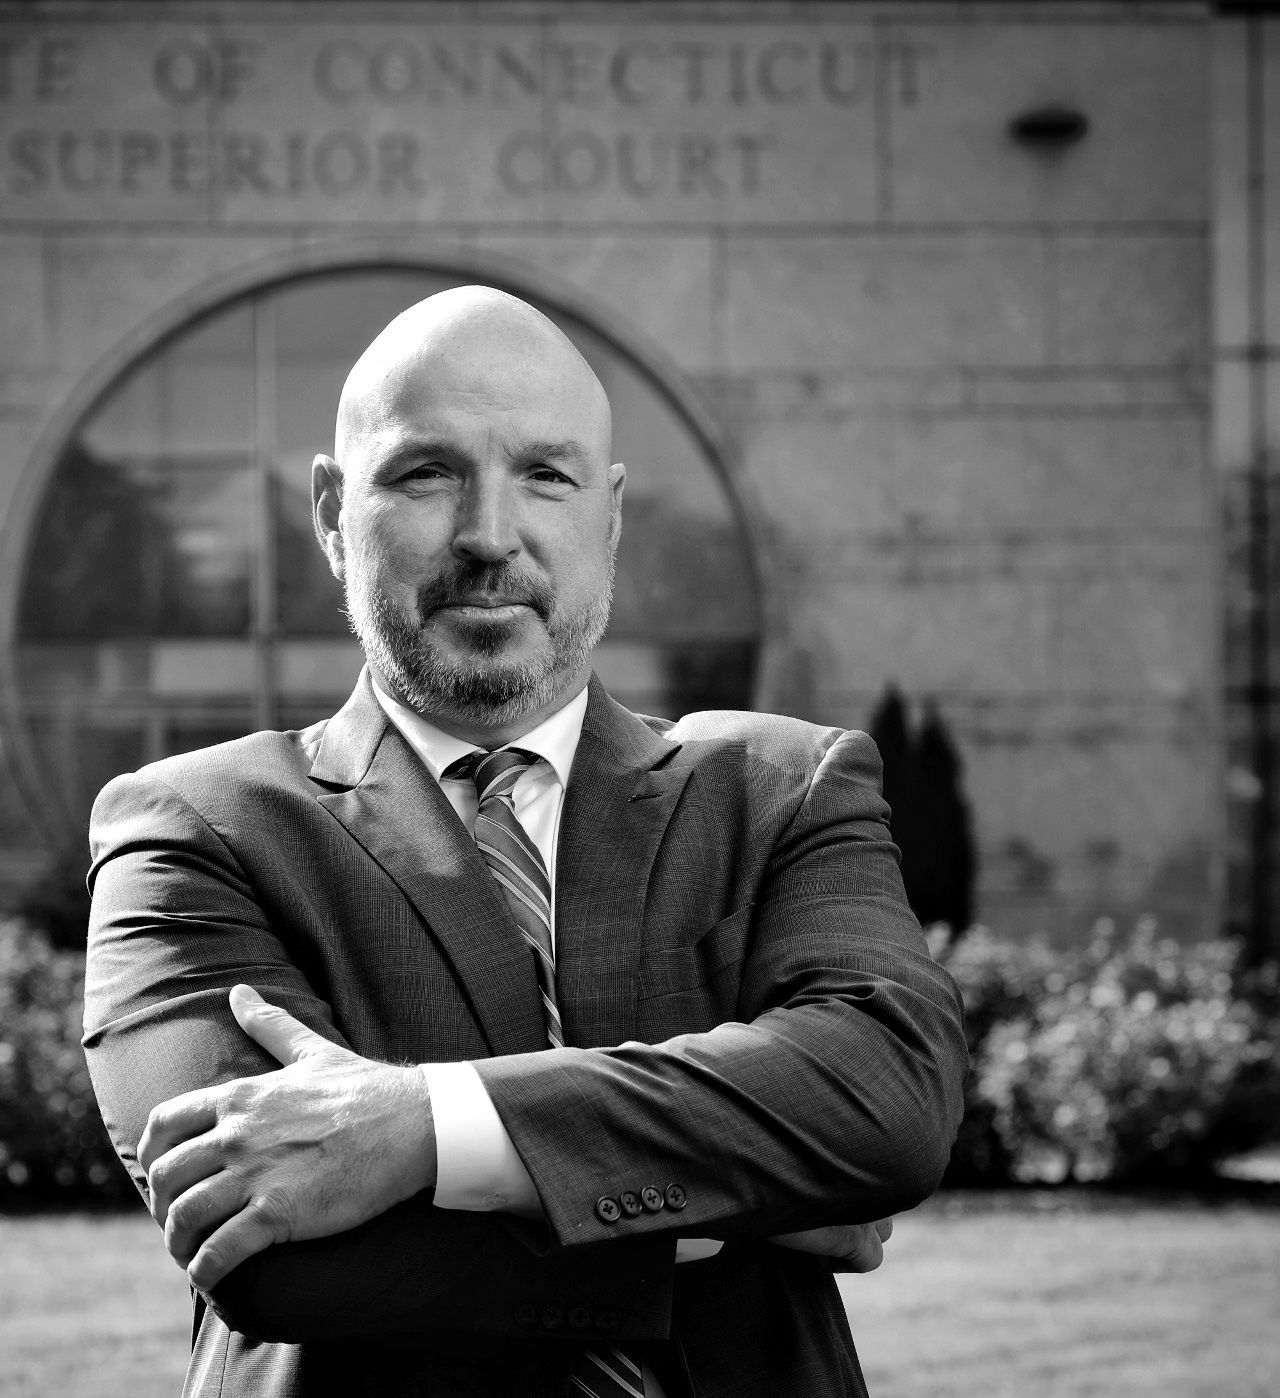 Sol Mahoney in a suit and tie is standing in front of a building that says superior court